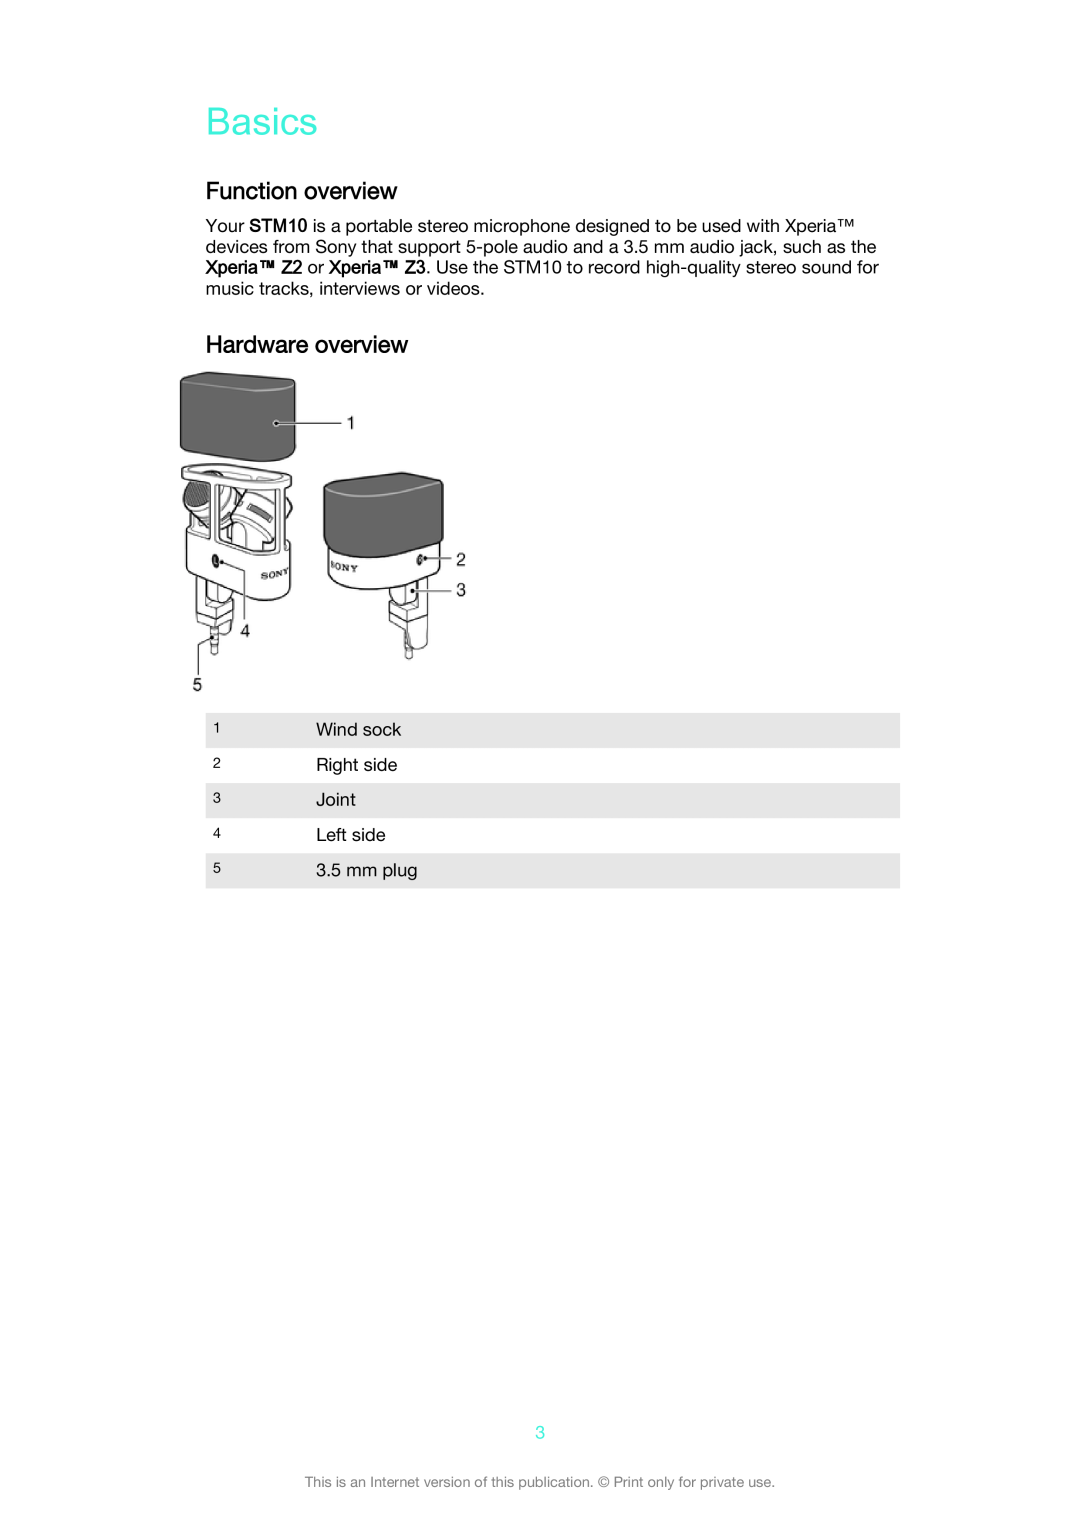 Sony STM10 manual Basics, Function overview, Hardware overview 